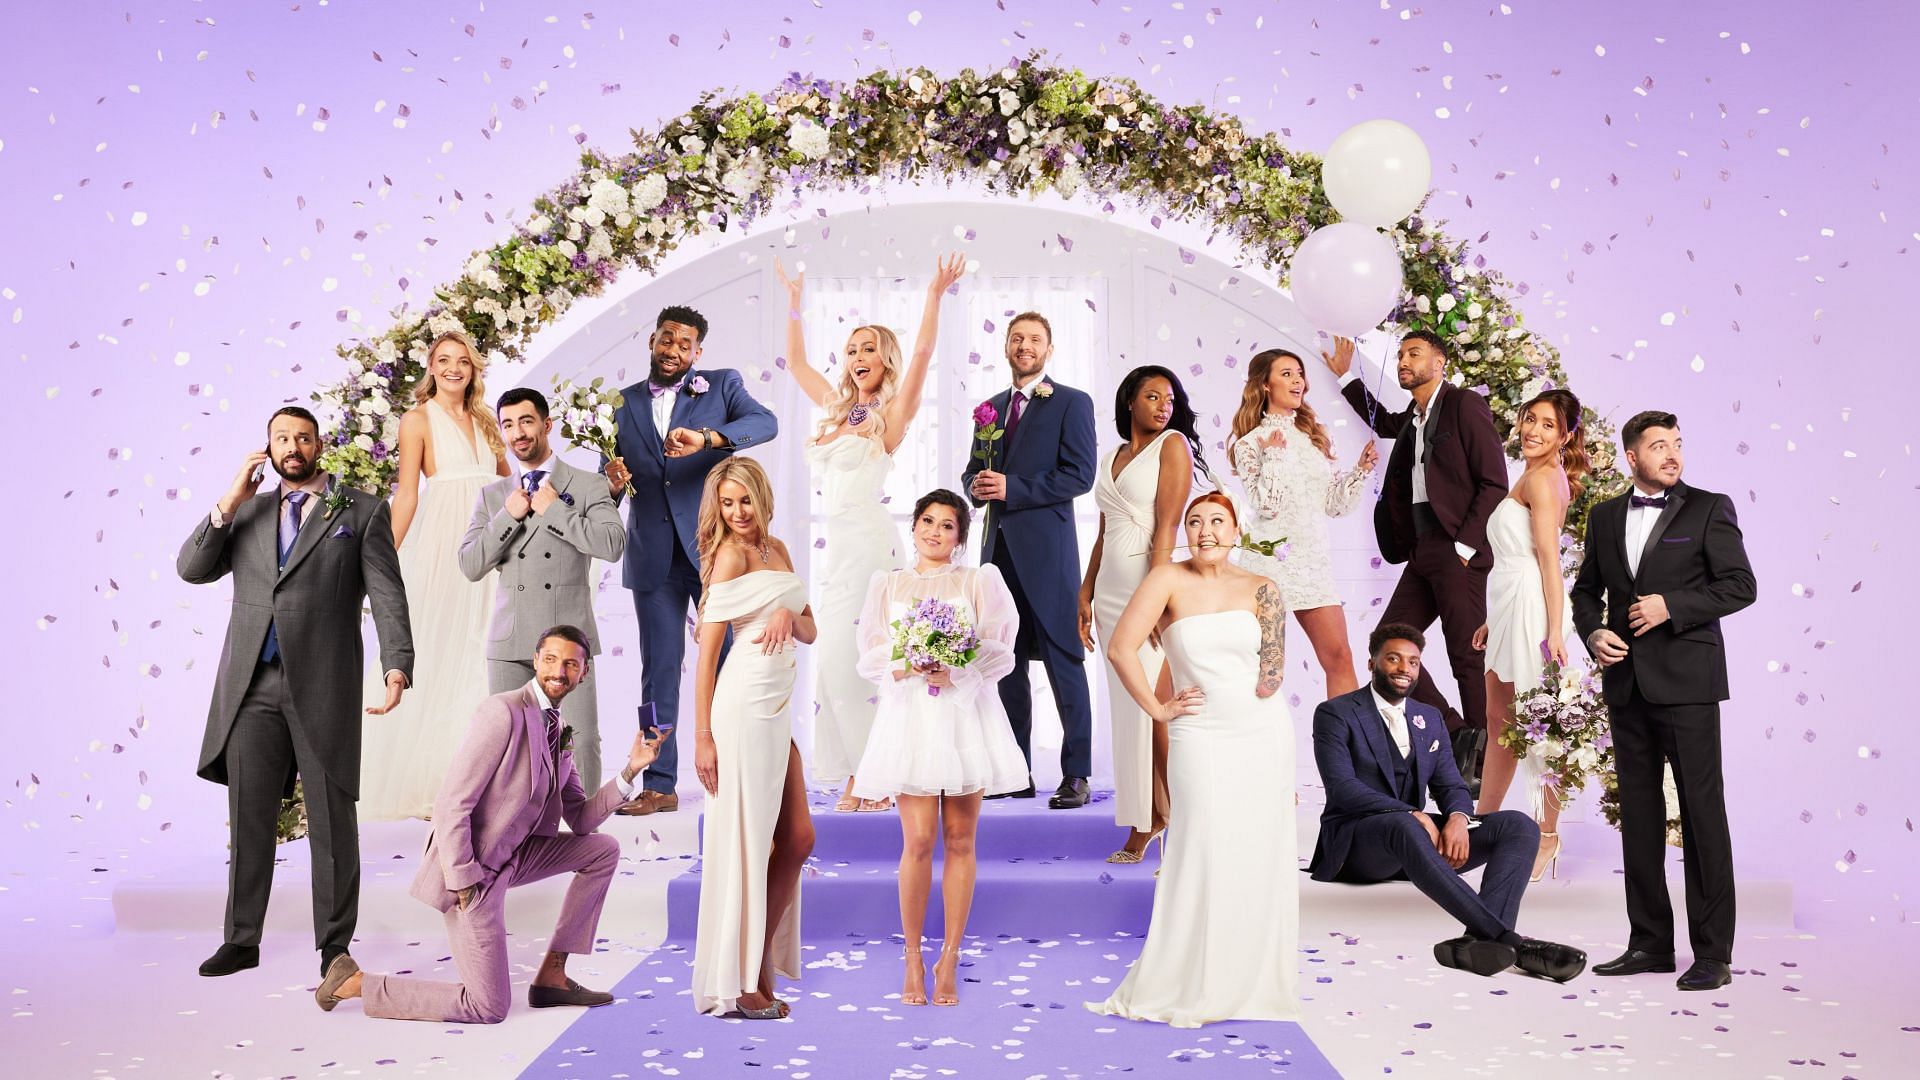 The cast of Married At First Sight UK season 8 (Image via E4)